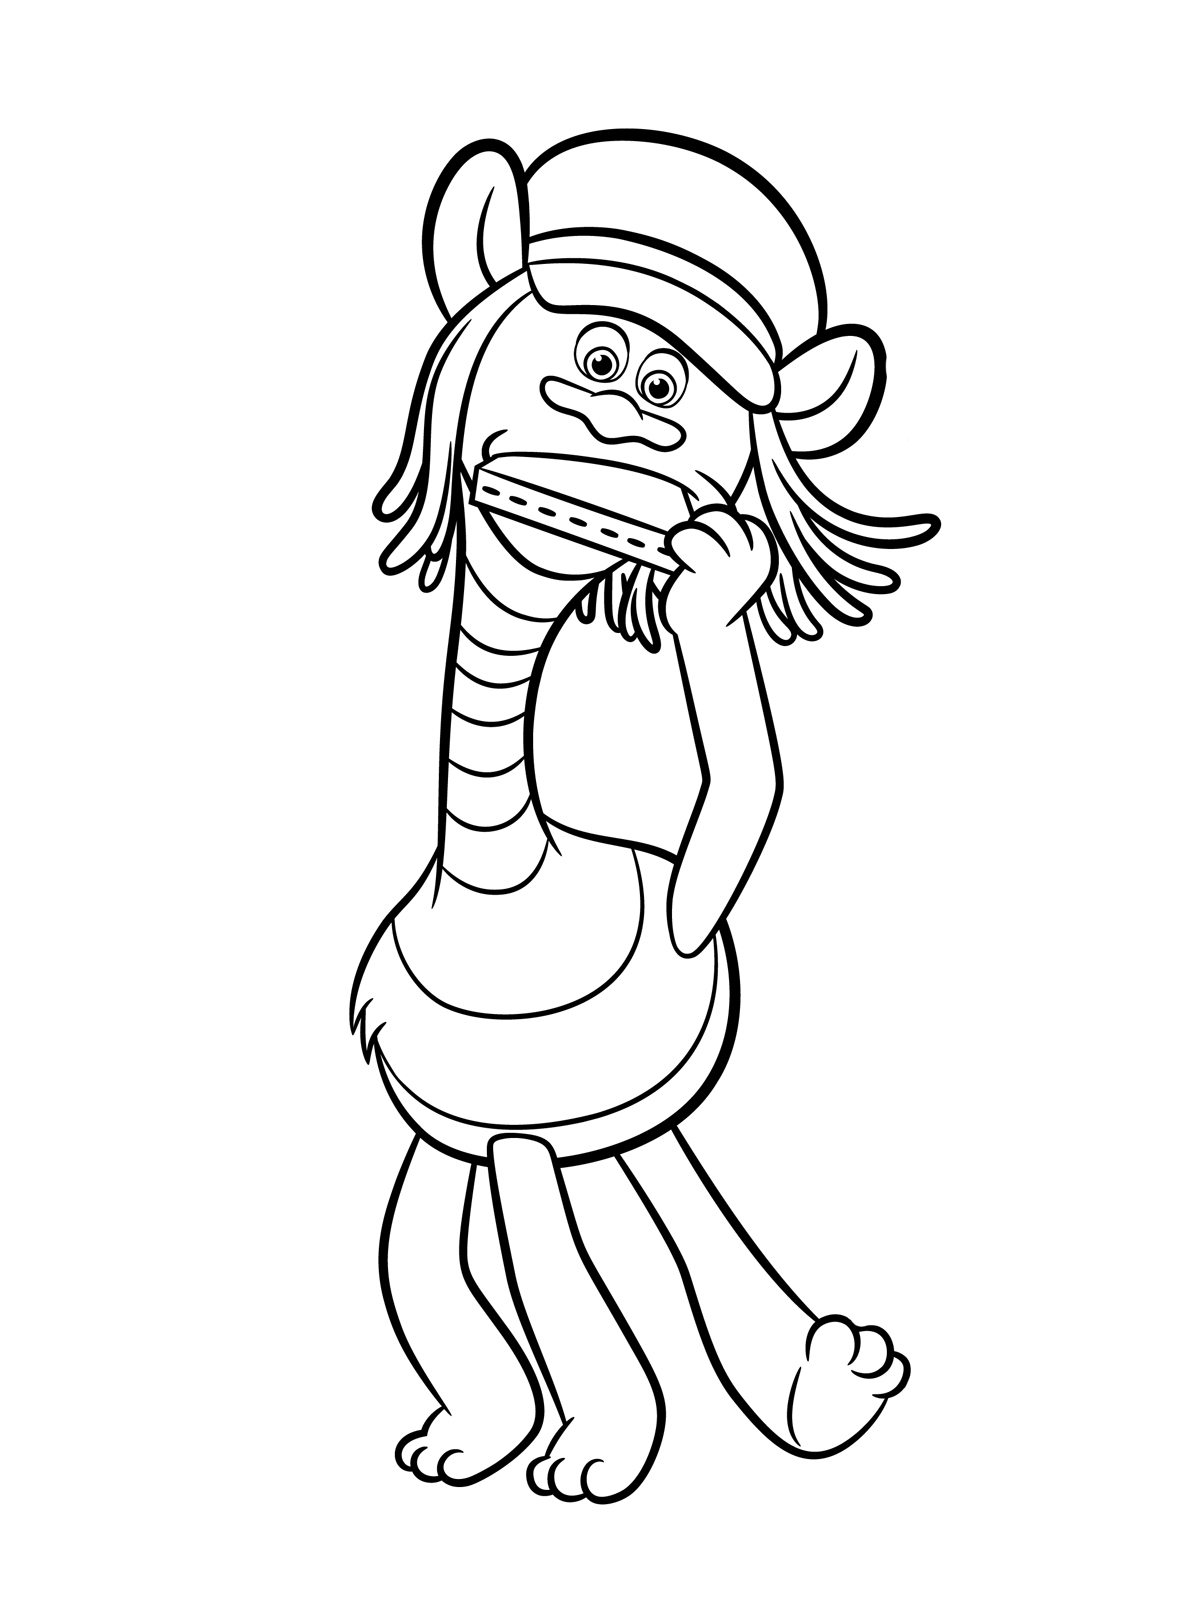 Trolls Movie Coloring Pages Coloring Page Trolls Crearphpnuke